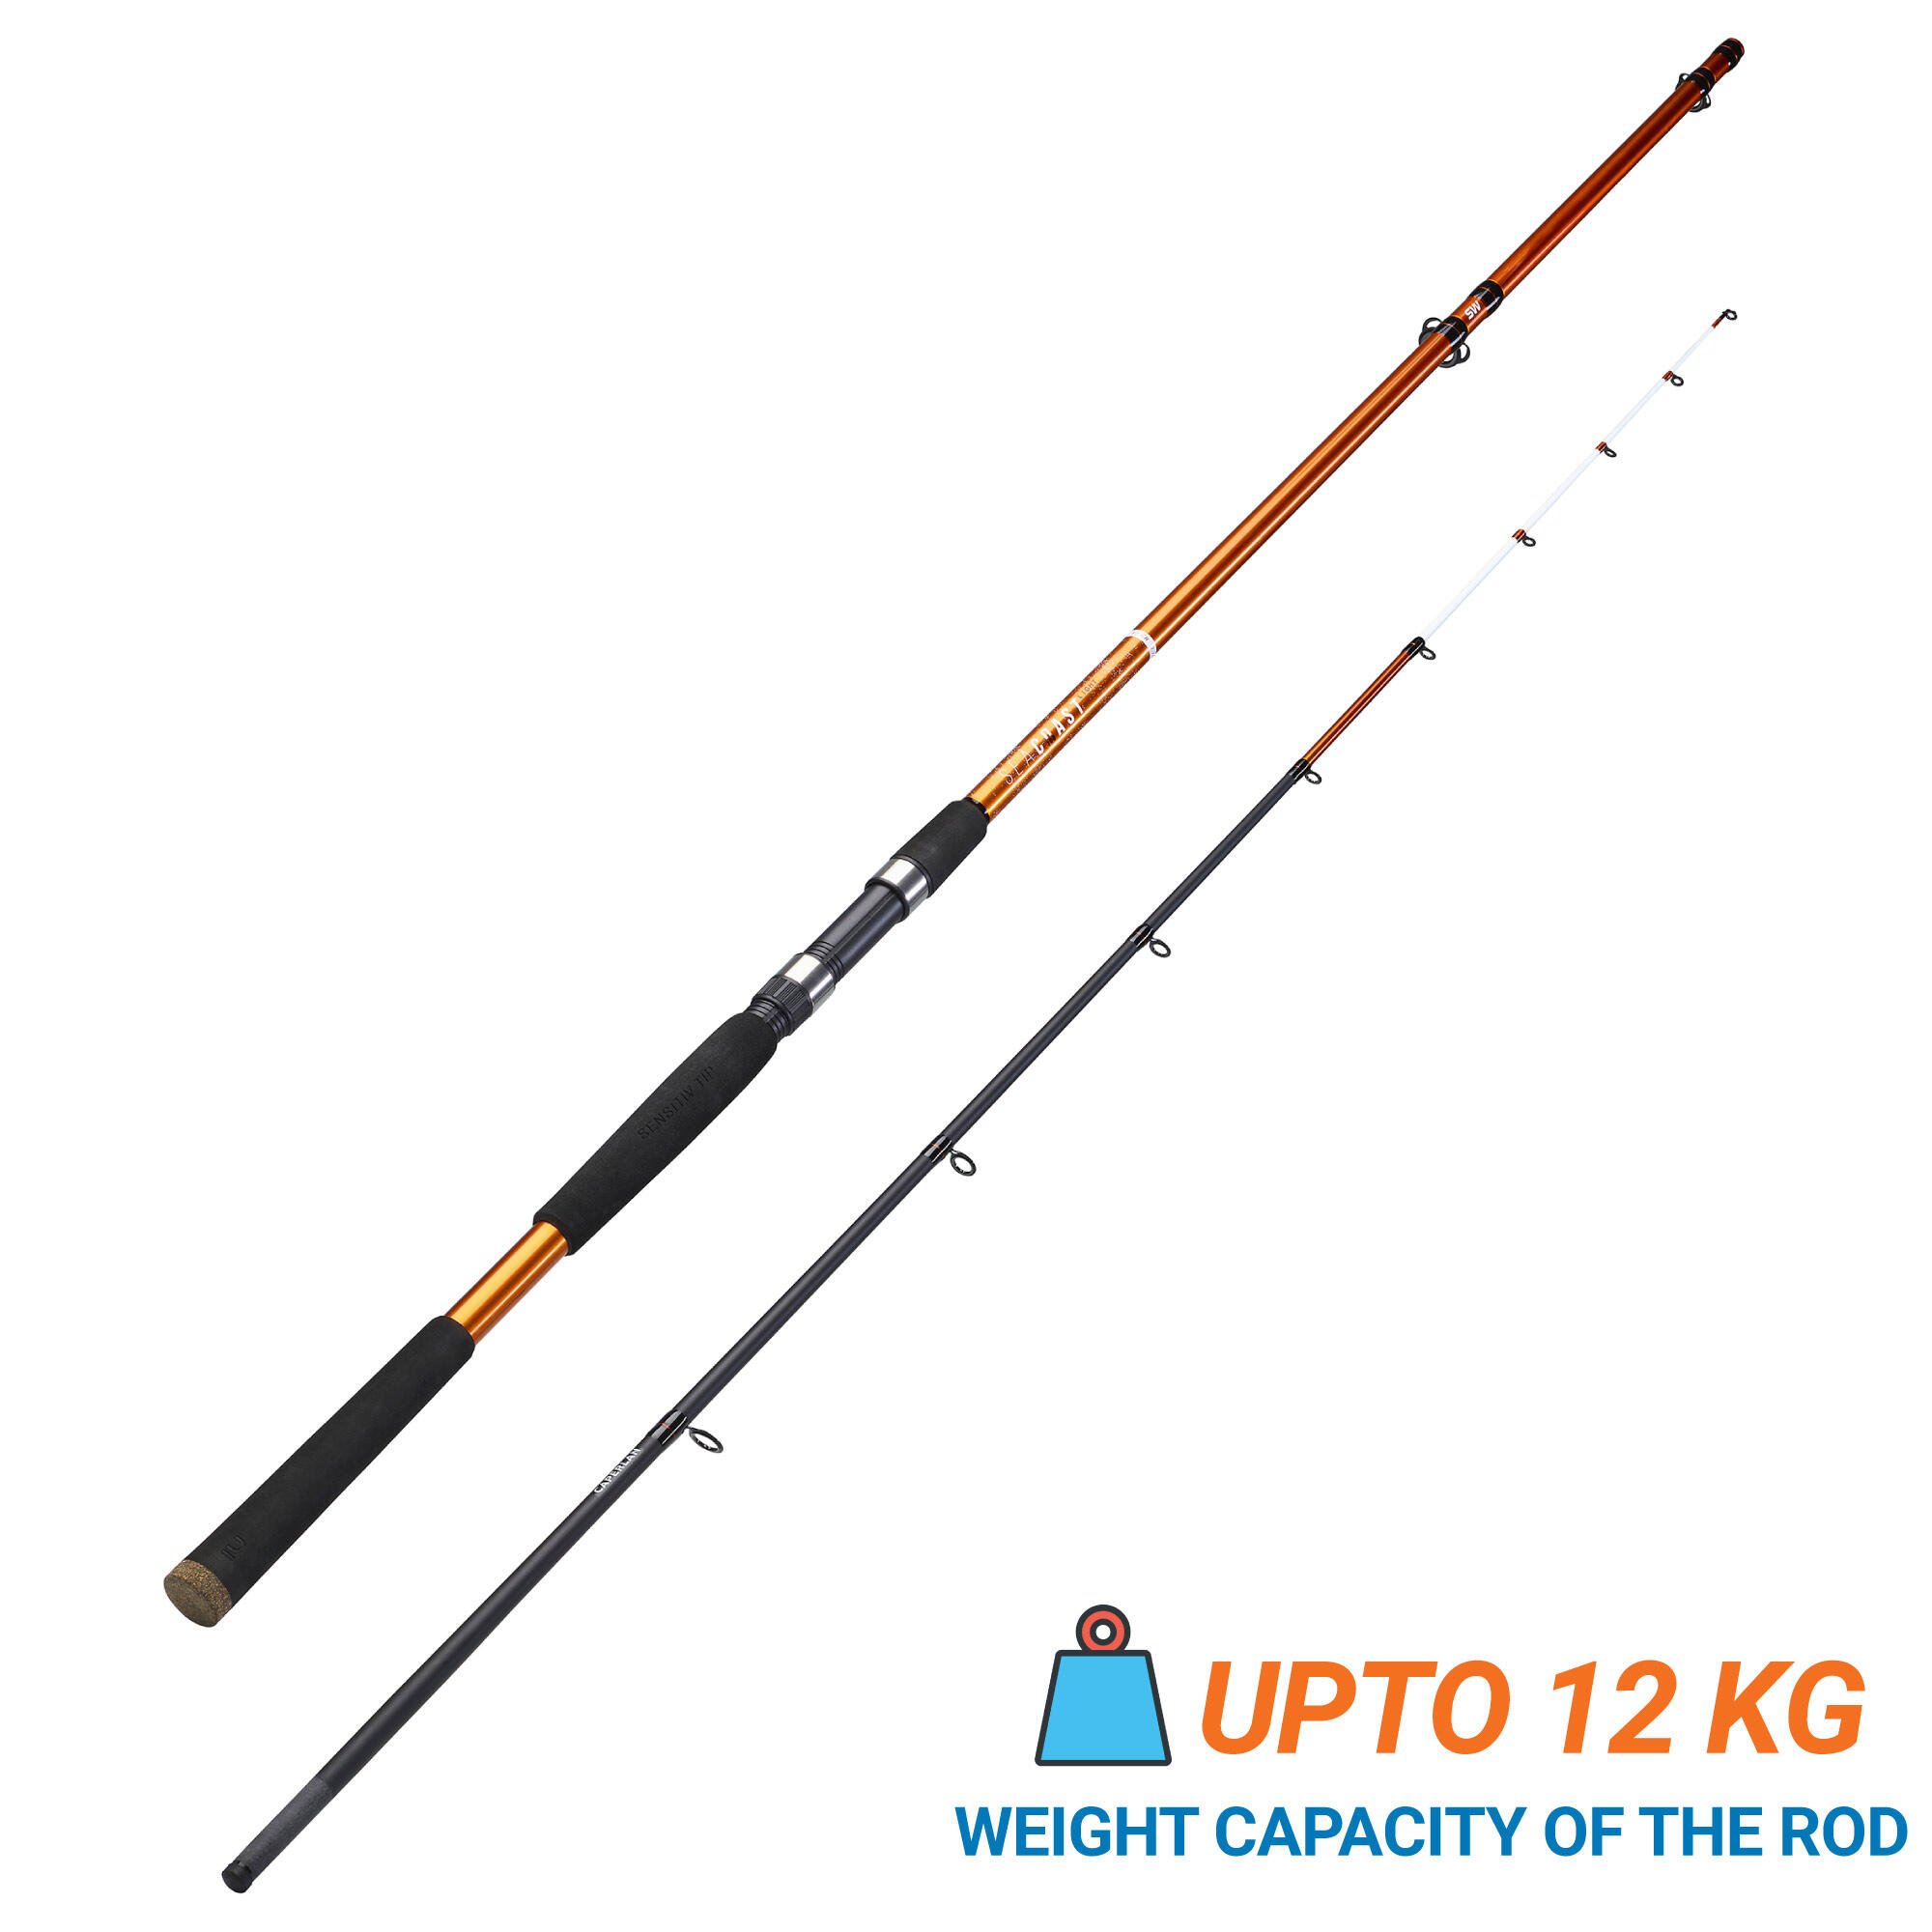 Fishing Rod 9ft Exotic and Tuna Wixom-9 - Black - One Size By CAPERLAN | Decathlon